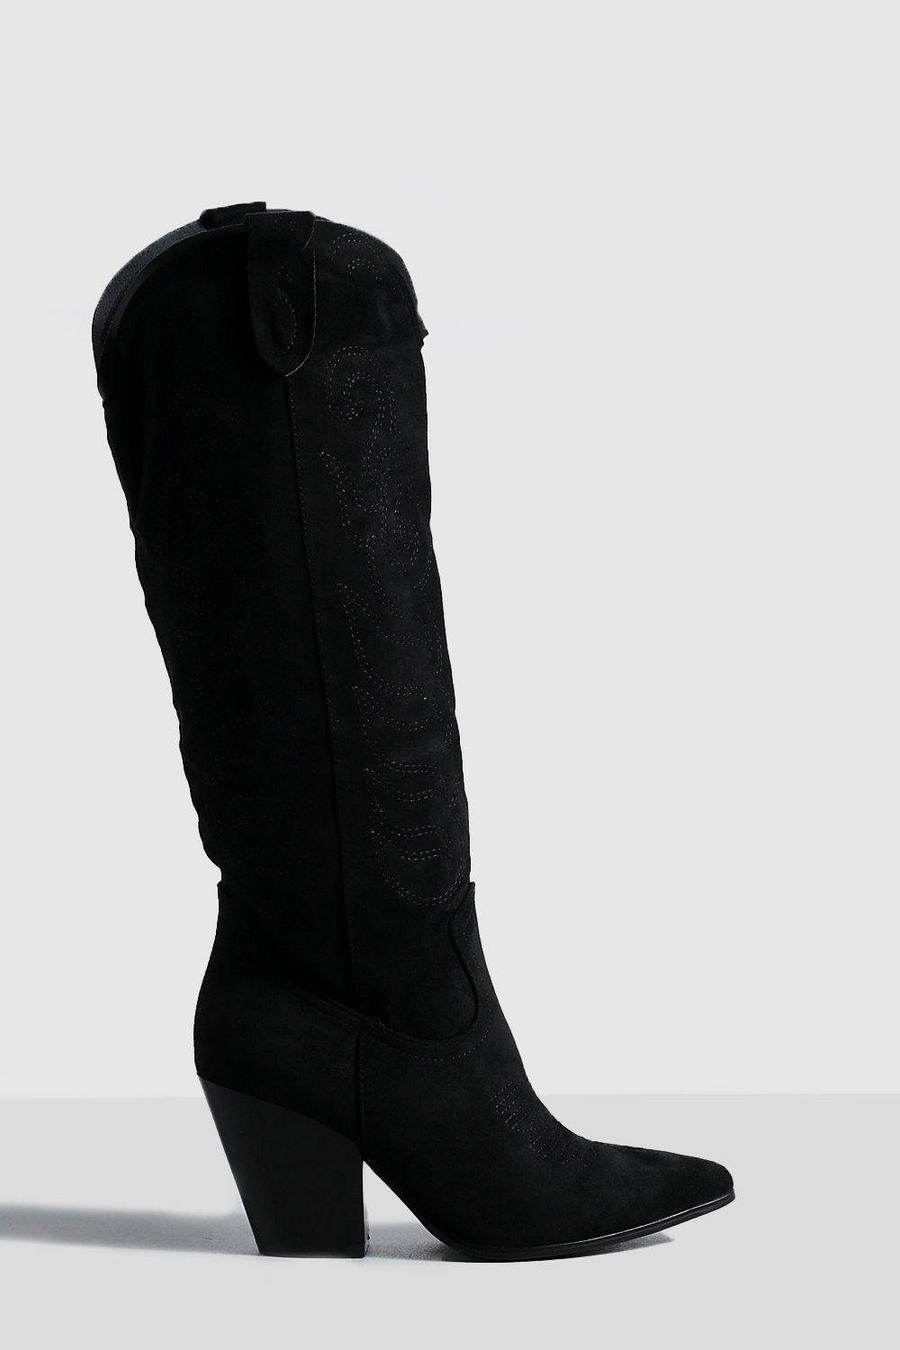 Black noir Embroidered Knee High Western Cowboy Boots